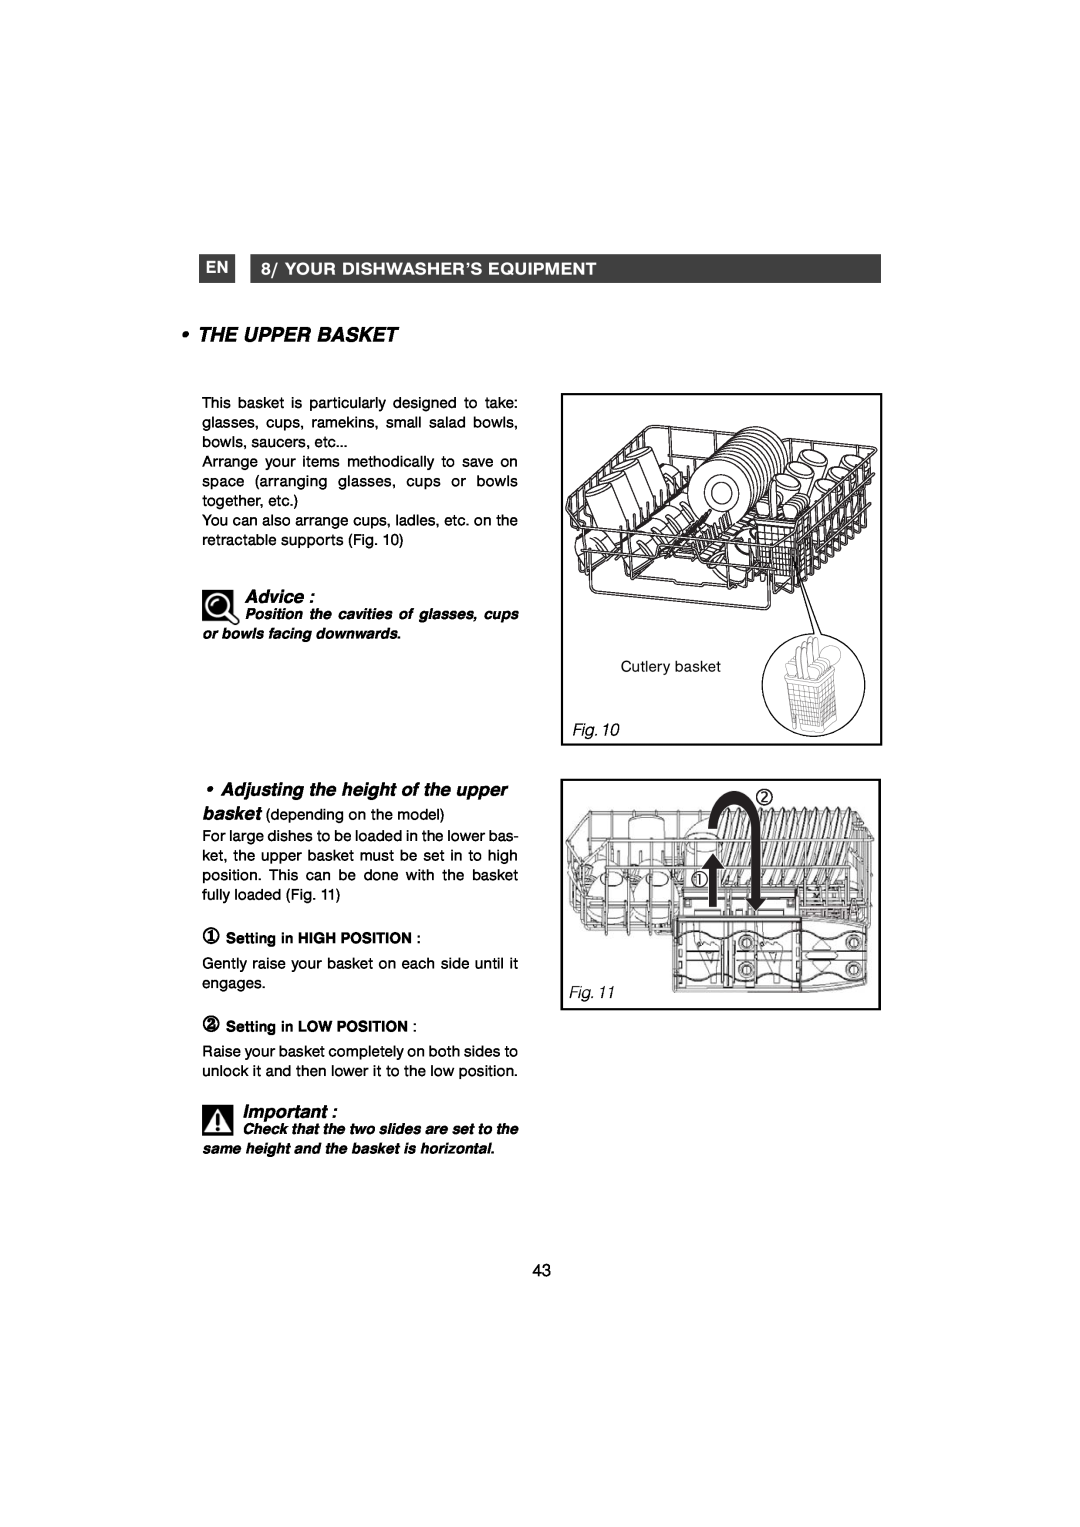 Foster S4000 manual The Upper Basket, Advice, EN 8/ YOUR DISHWASHER’S EQUIPMENT 